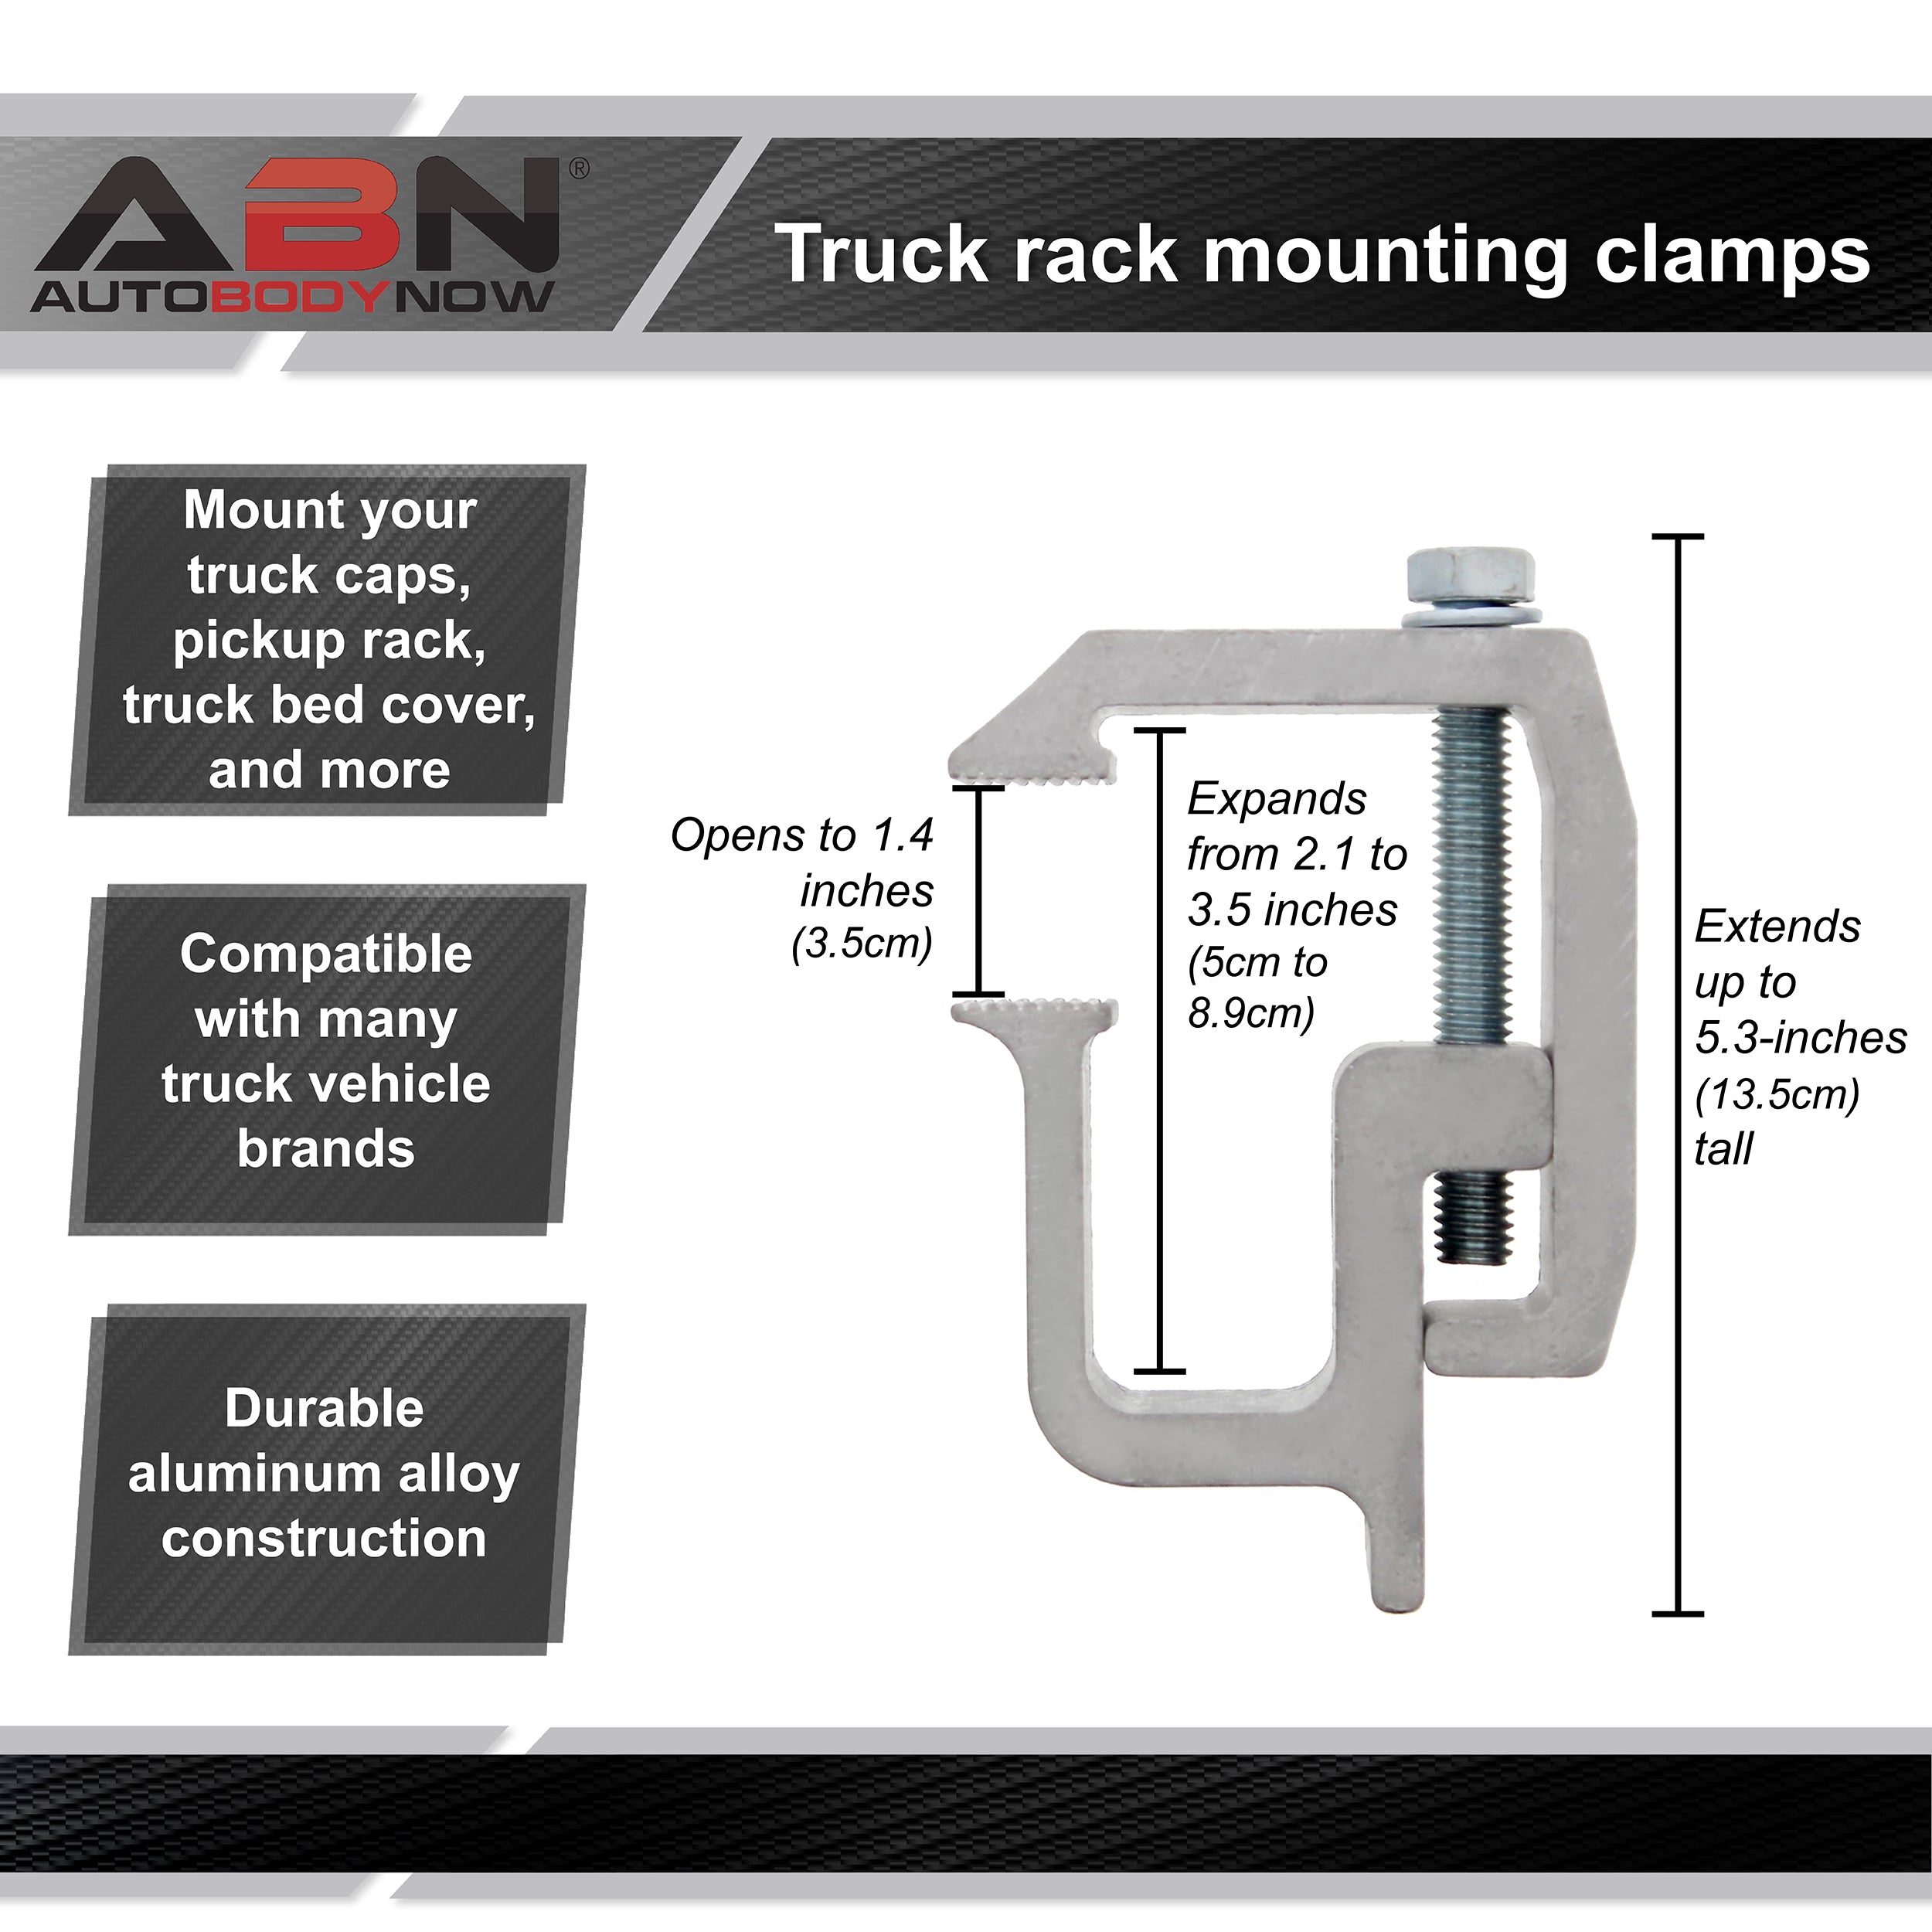 Truck Topper Clamps - 6 Pack Canopy and Truck Cap Mounting Clamps